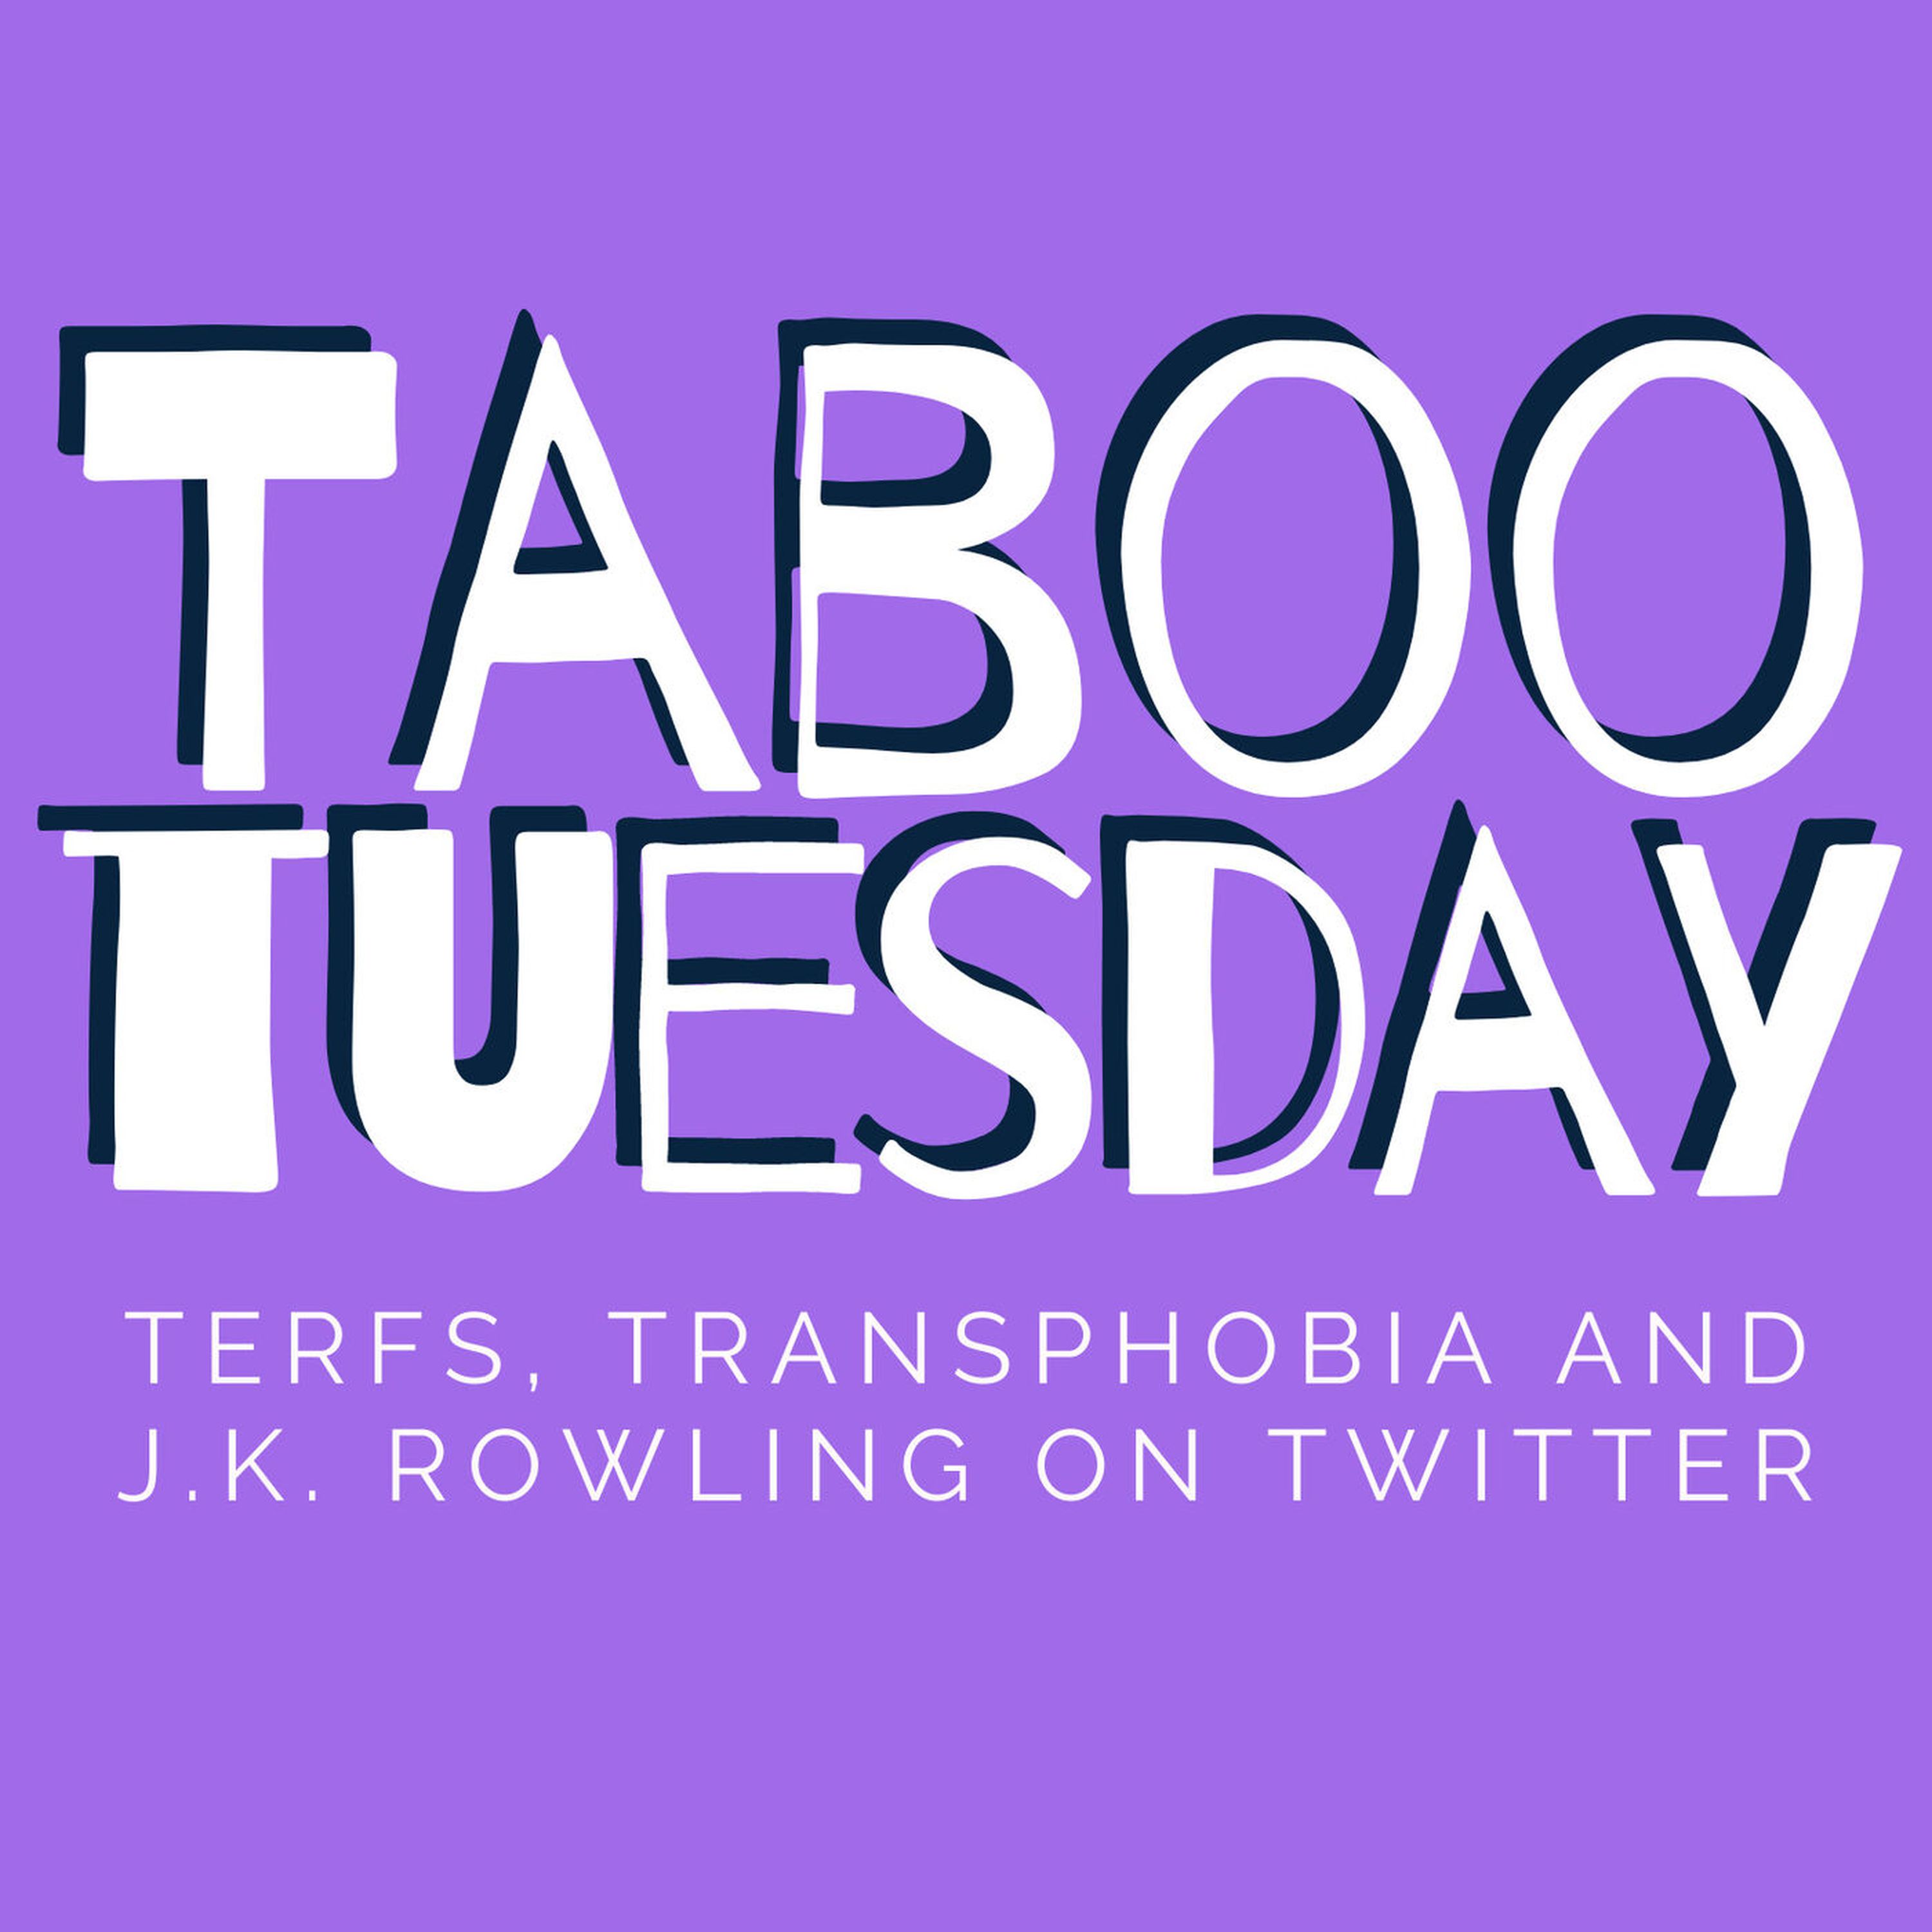 Taboo Tuesday: J.K. Rowling and the Transphobic TERFs on Twitter